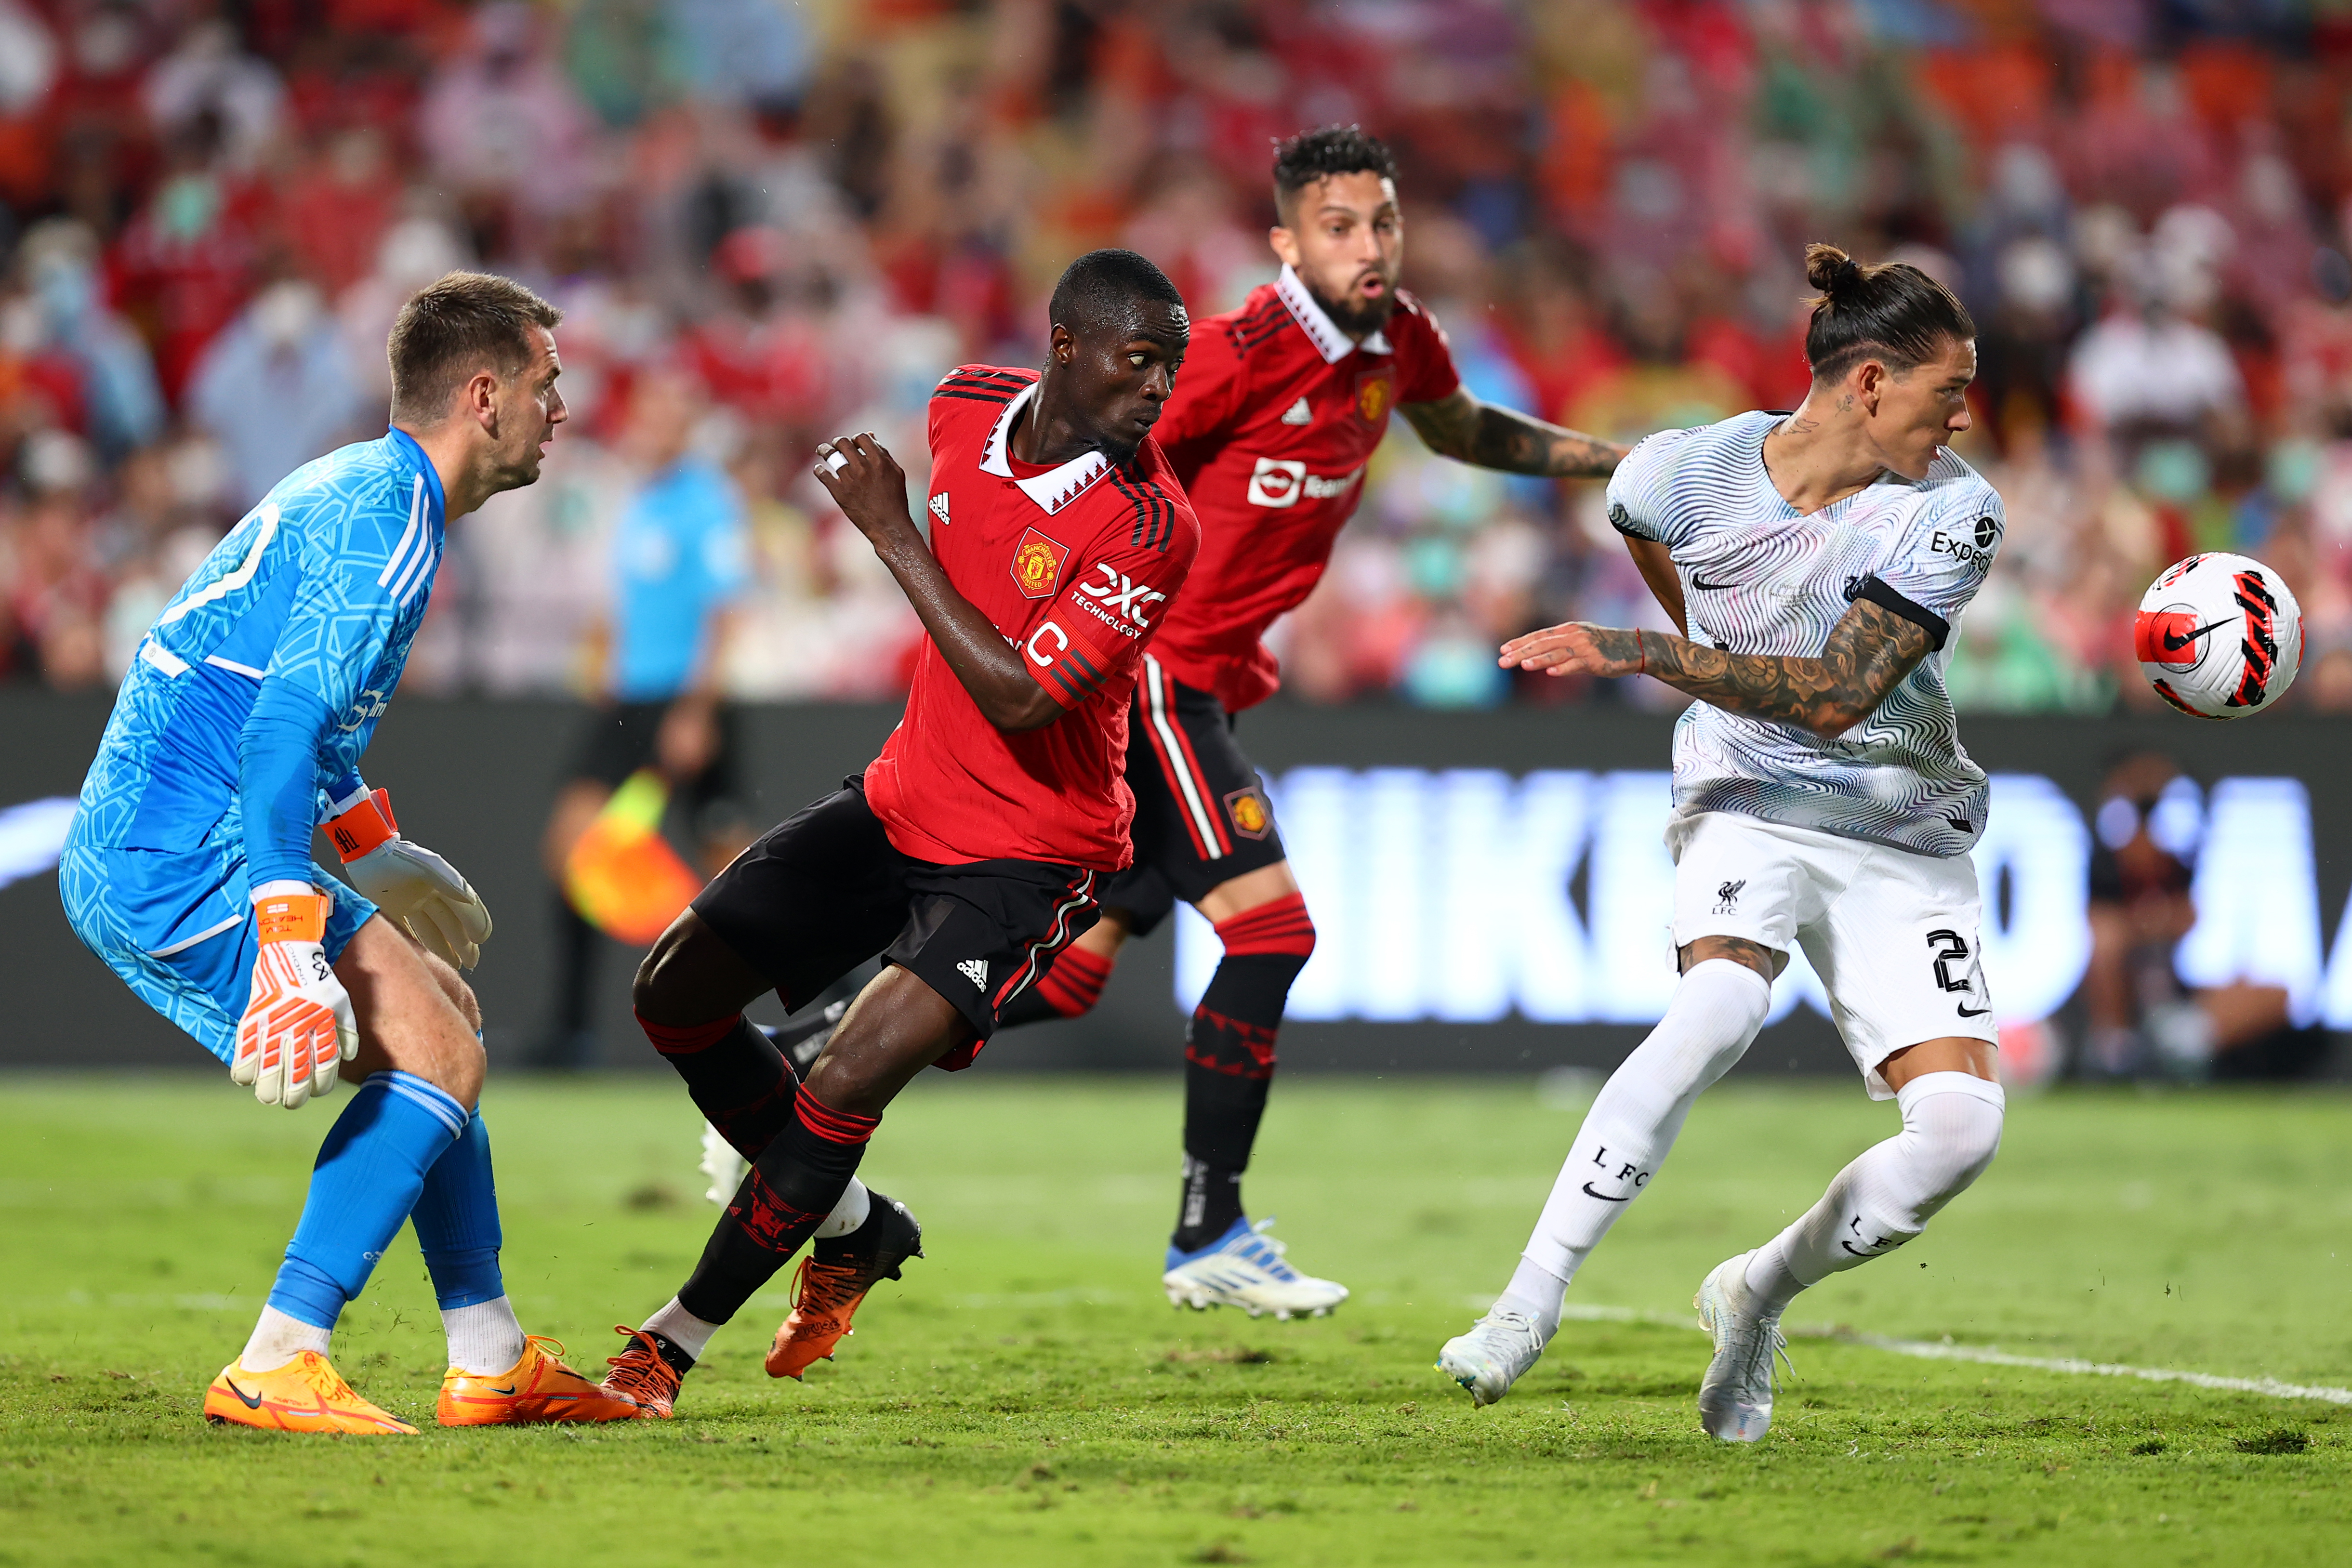 Darwin Nunez #27 of Liverpool competes for the ball against goalkeeper Tom Heaton #22 and Eric Bailly #3 of Manchester United during the second half of a preseason friendly match at Rajamangala National Stadium on July 12, 2022 in Bangkok, Thailand.